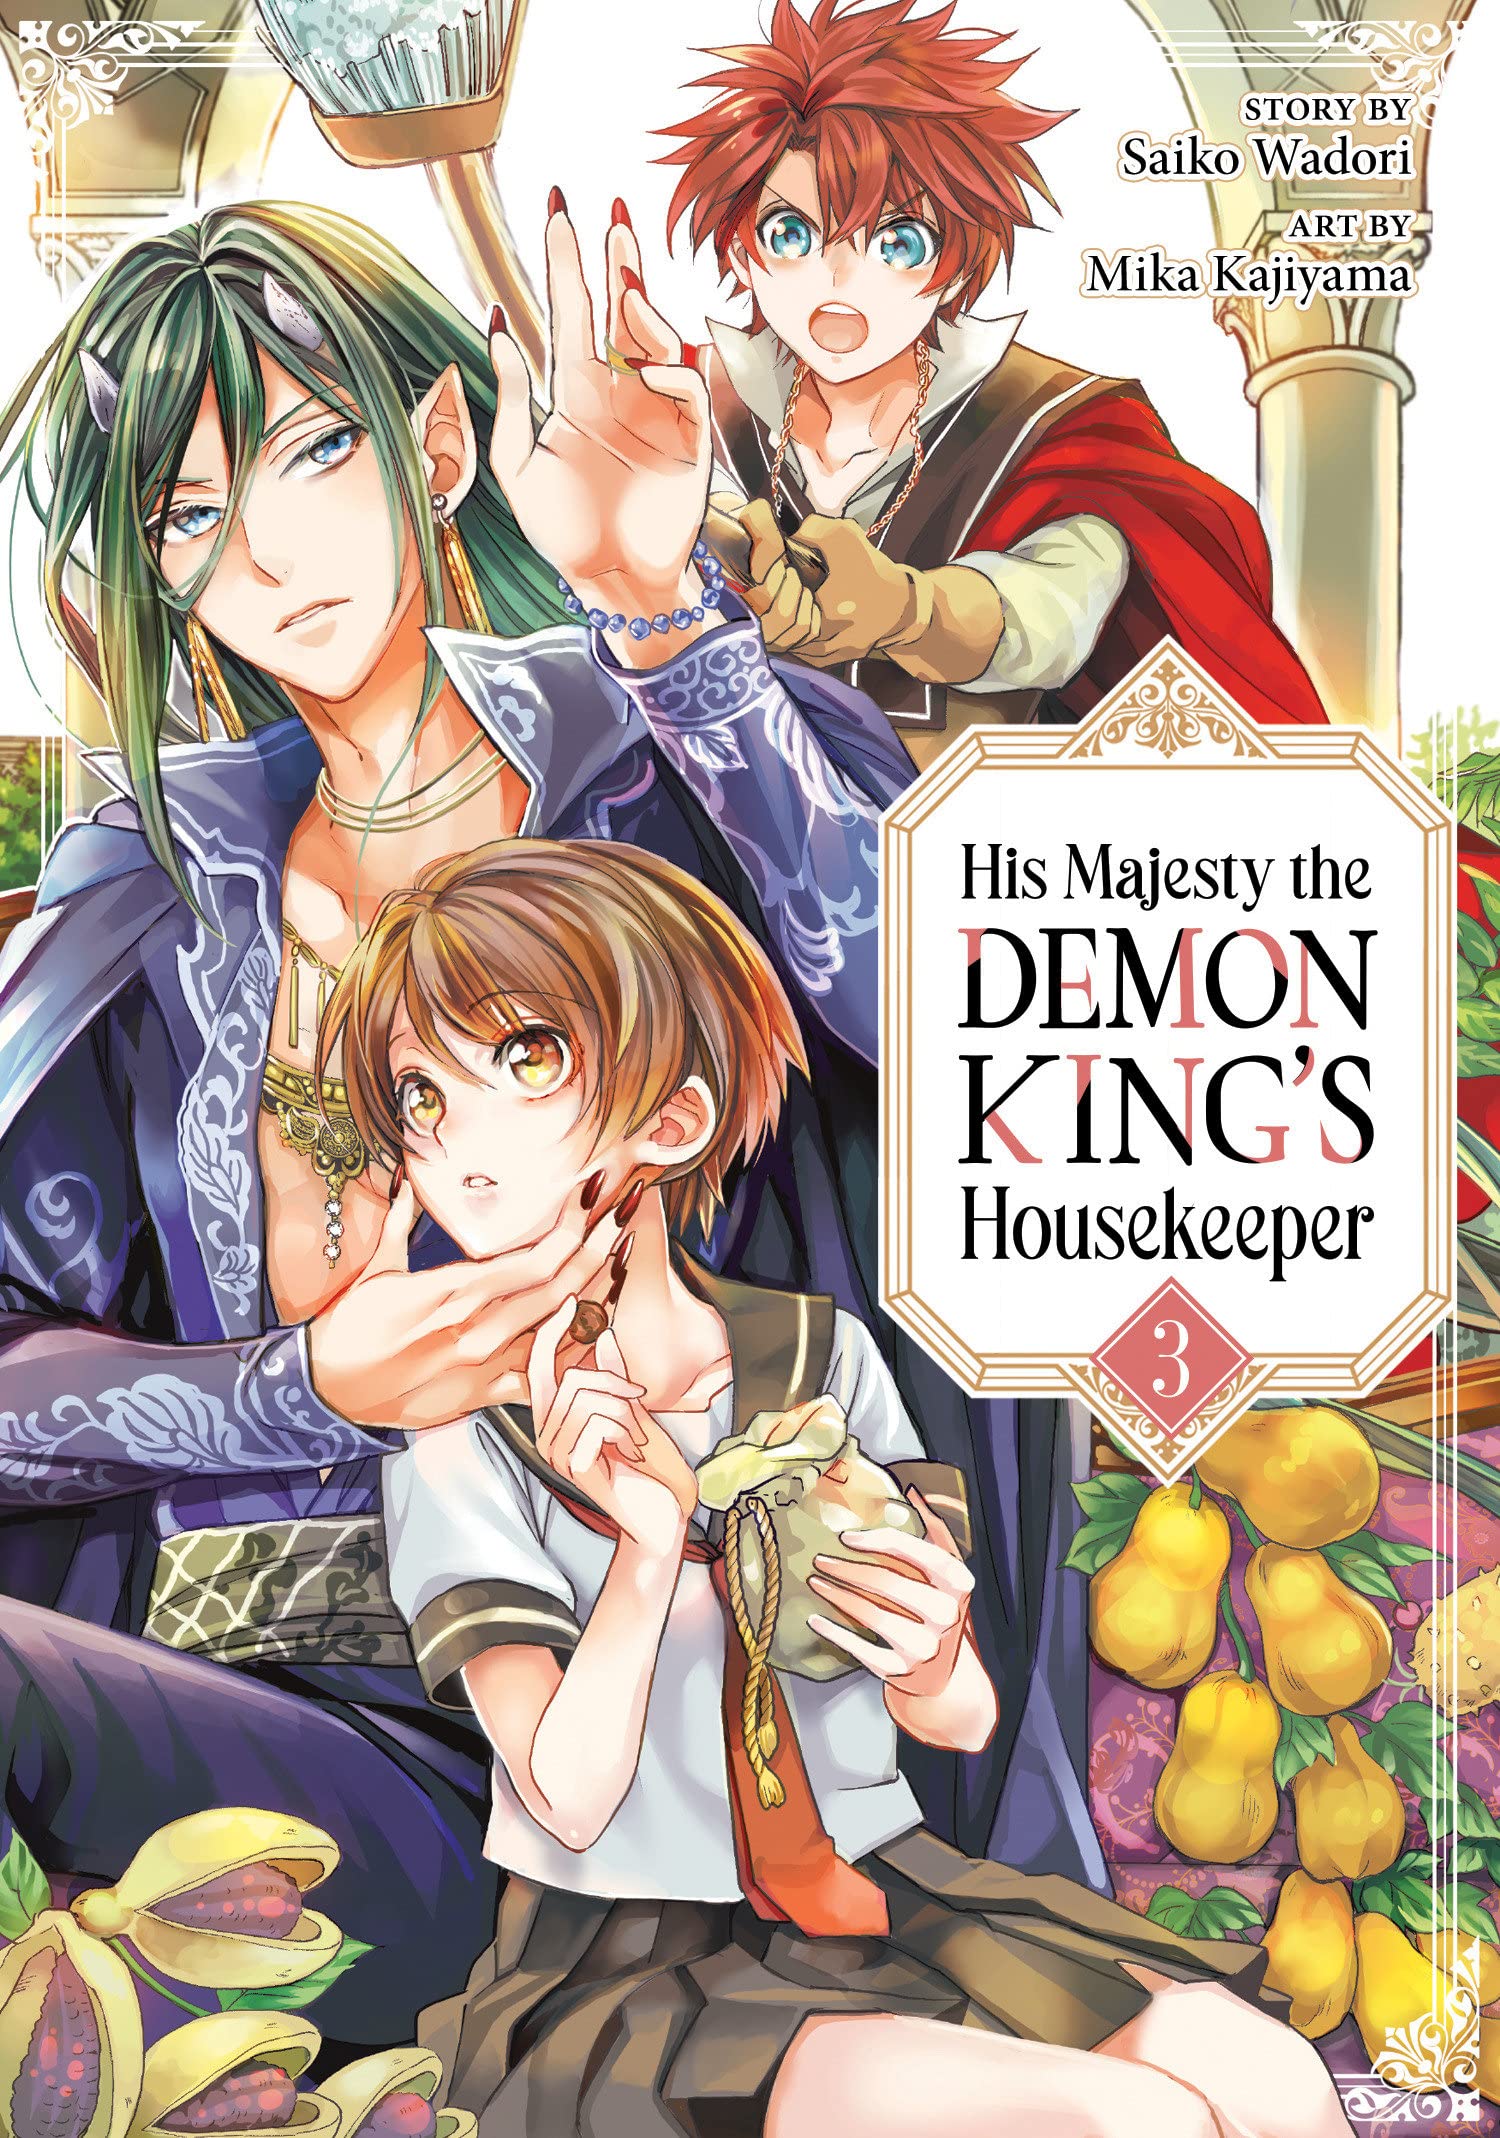 His Majesty the Demon King's Housekeeper Vol. 03